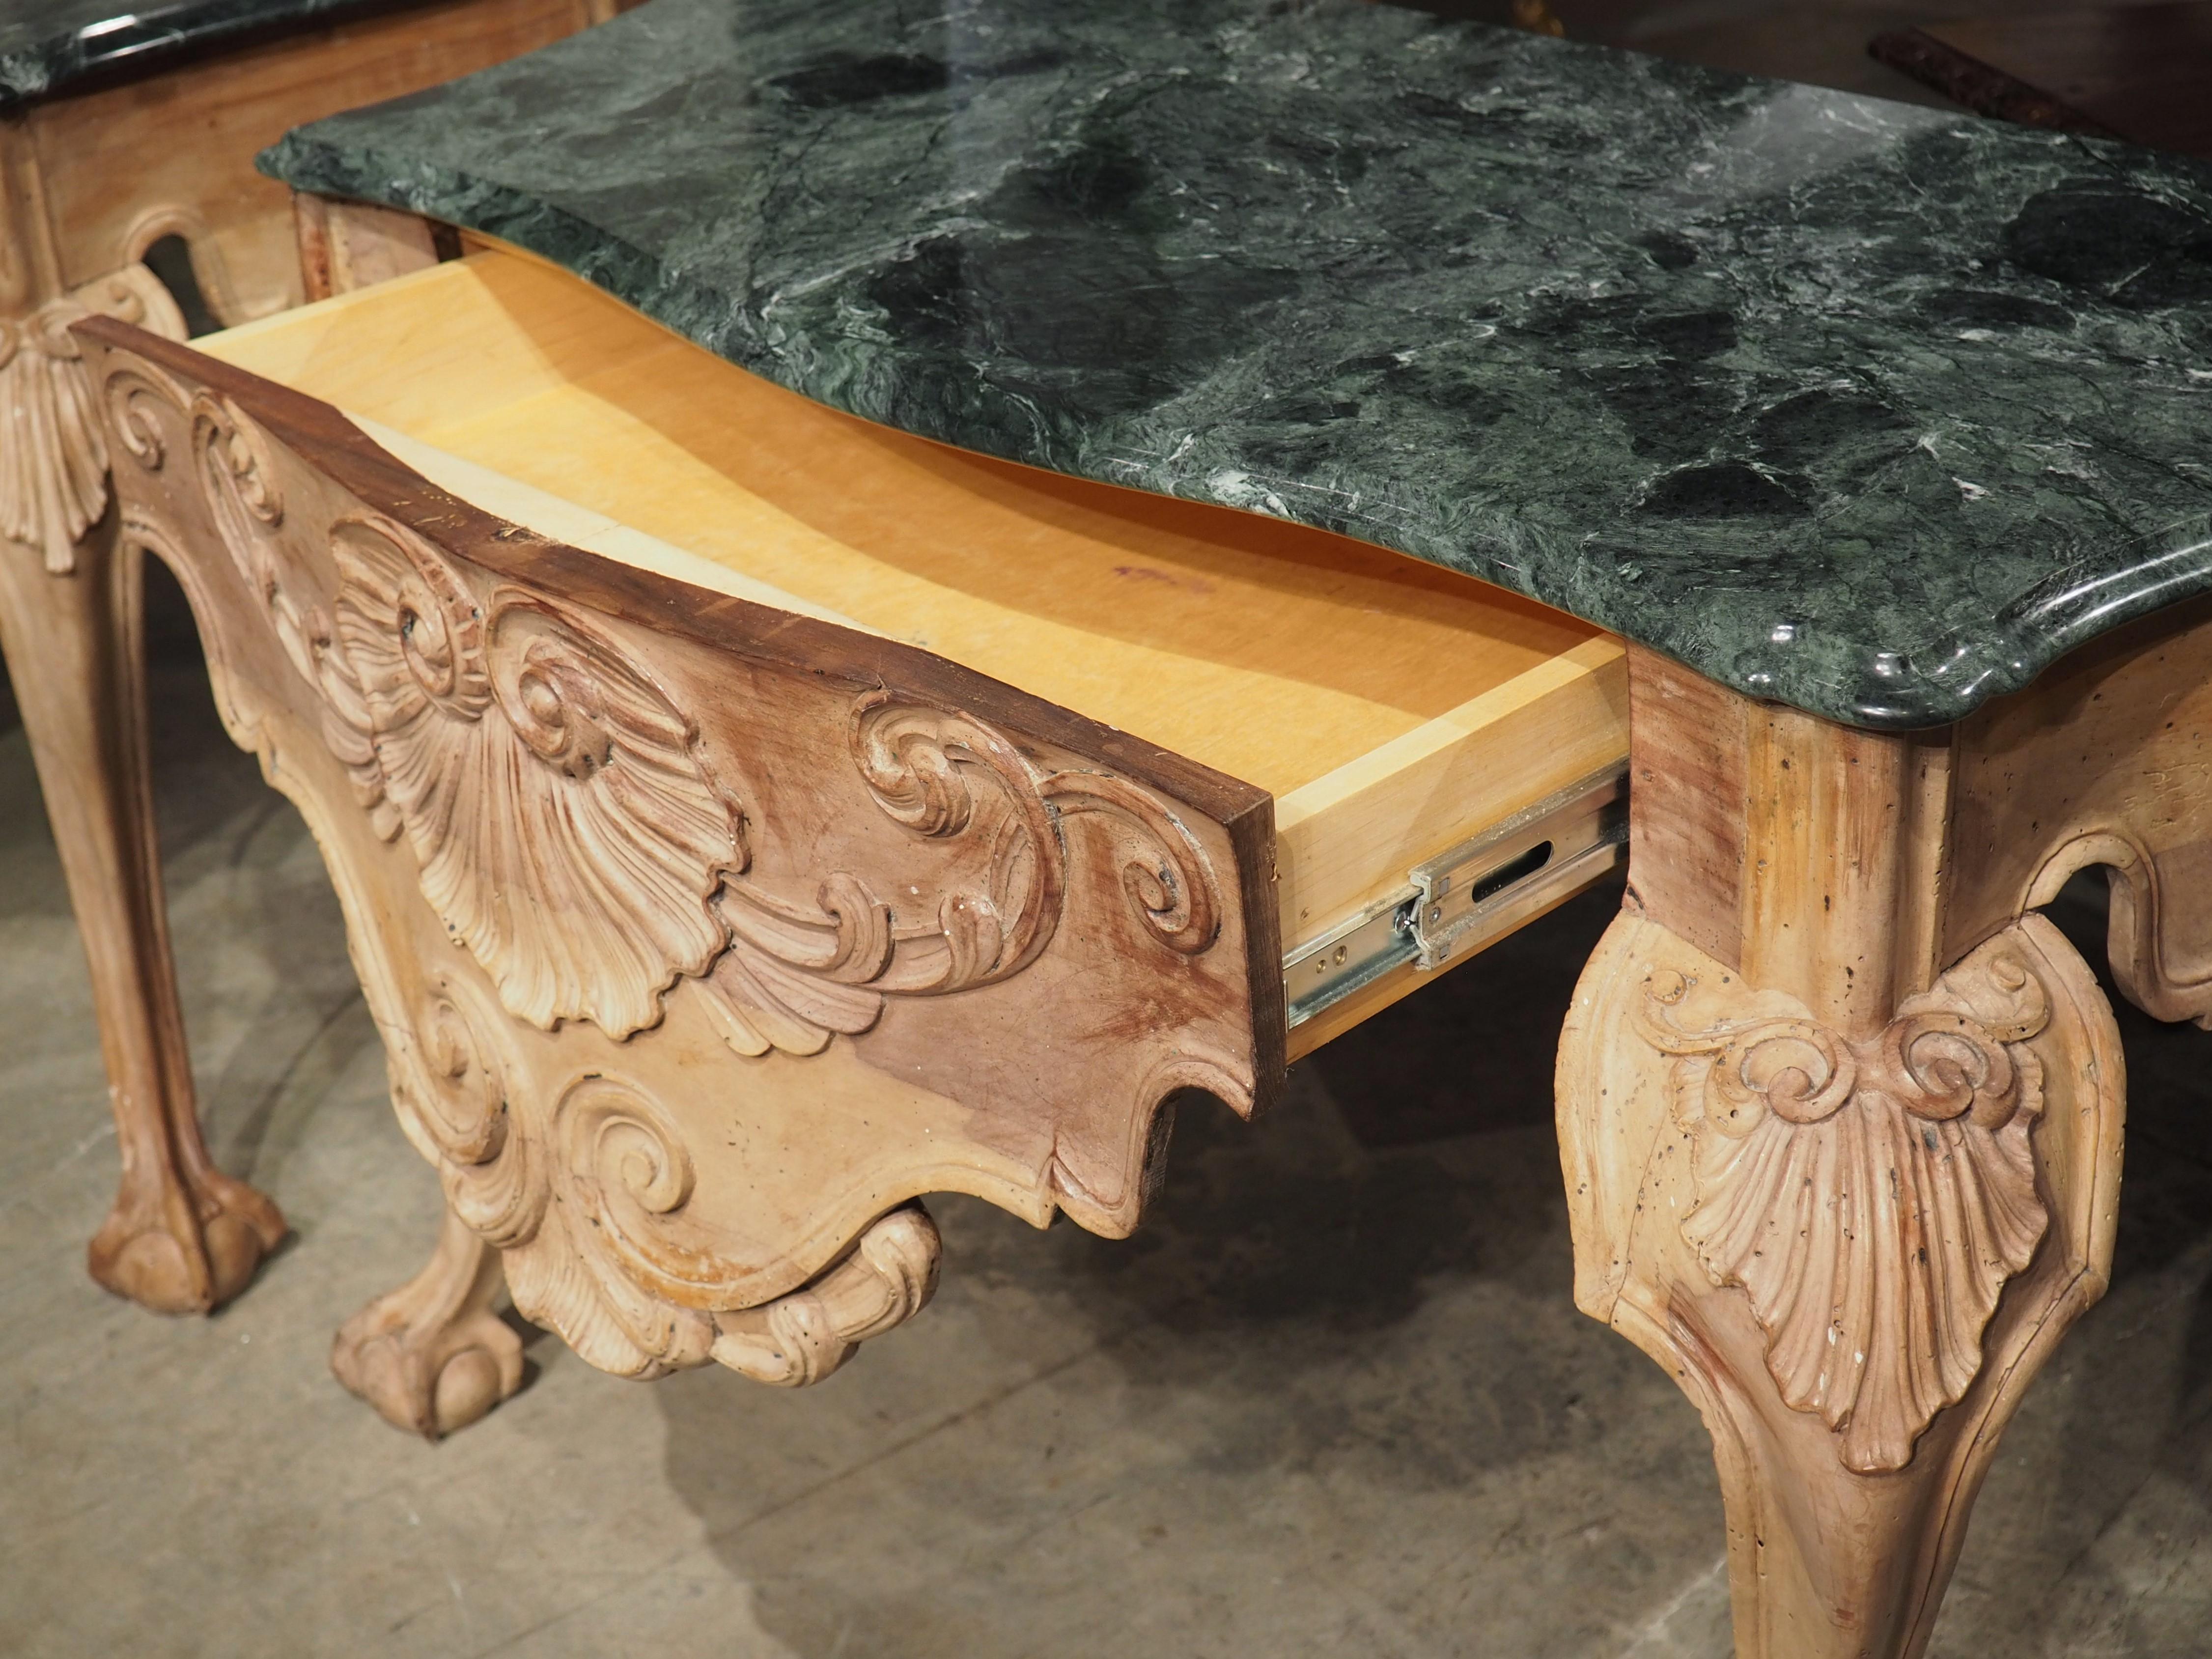 Pair of 18th Century English Ball and Claw Console Tables with Marble Tops For Sale 6